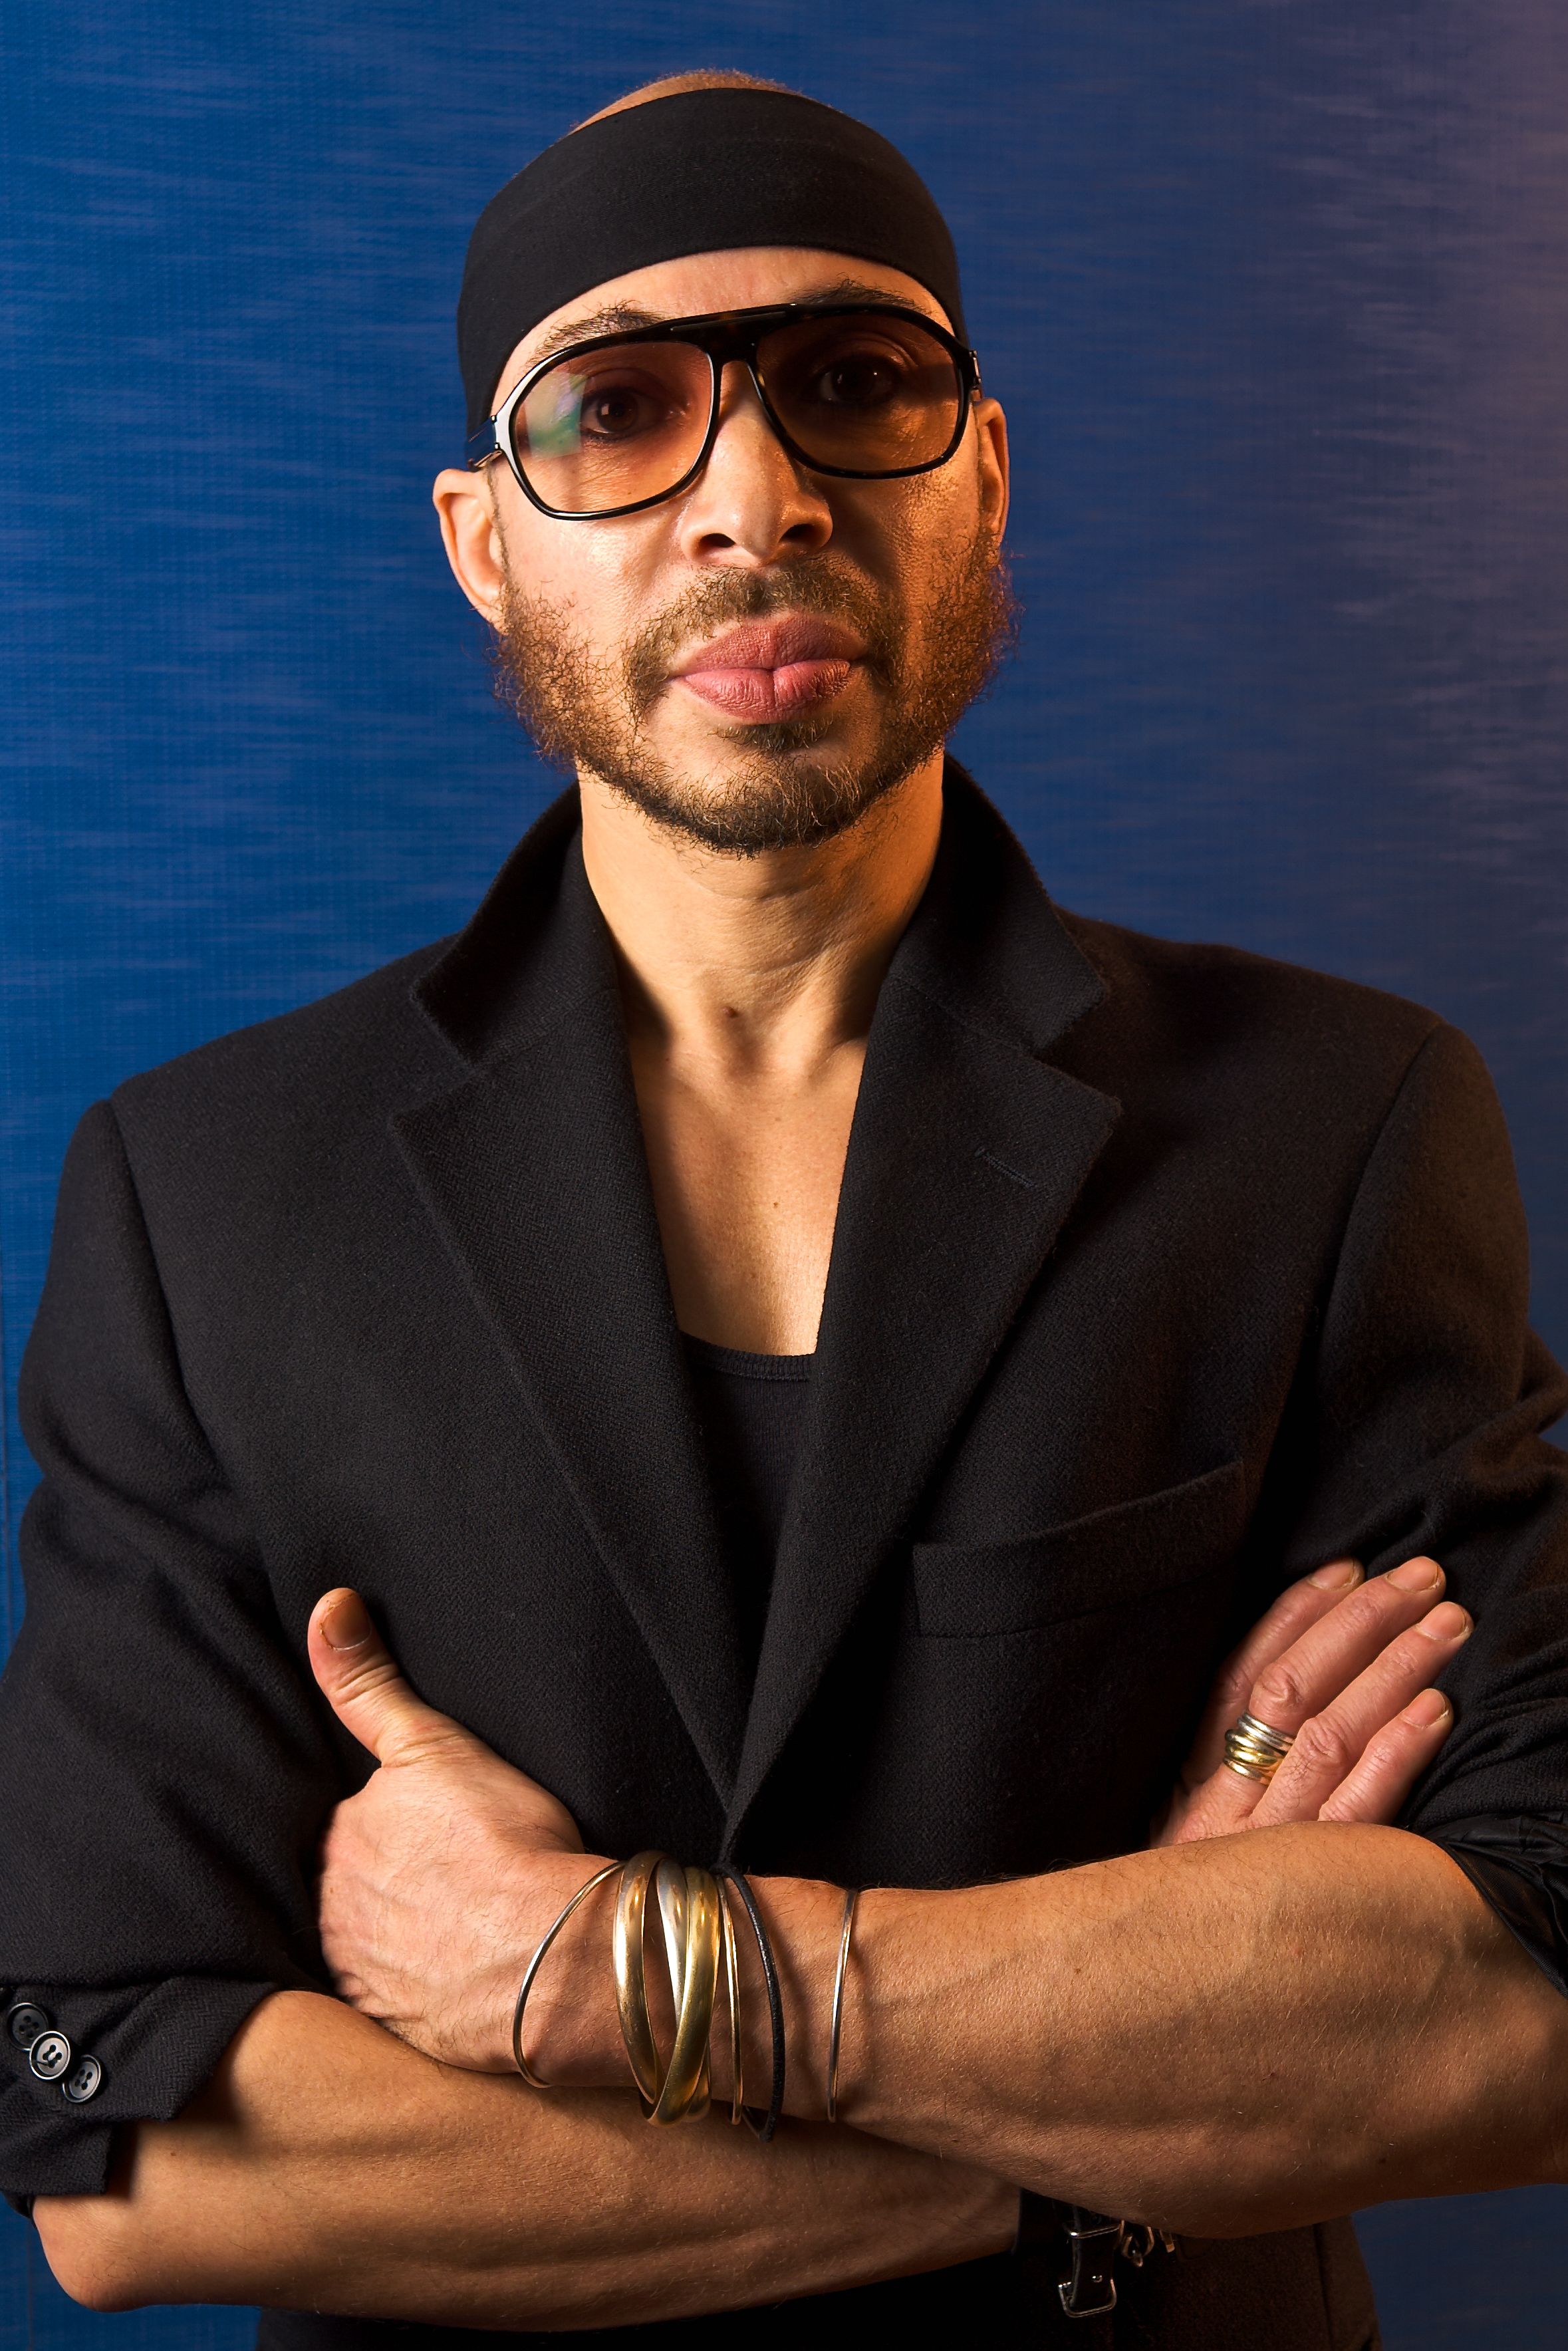 Portrait of an African American man on blue background with sunglasses and bracelets